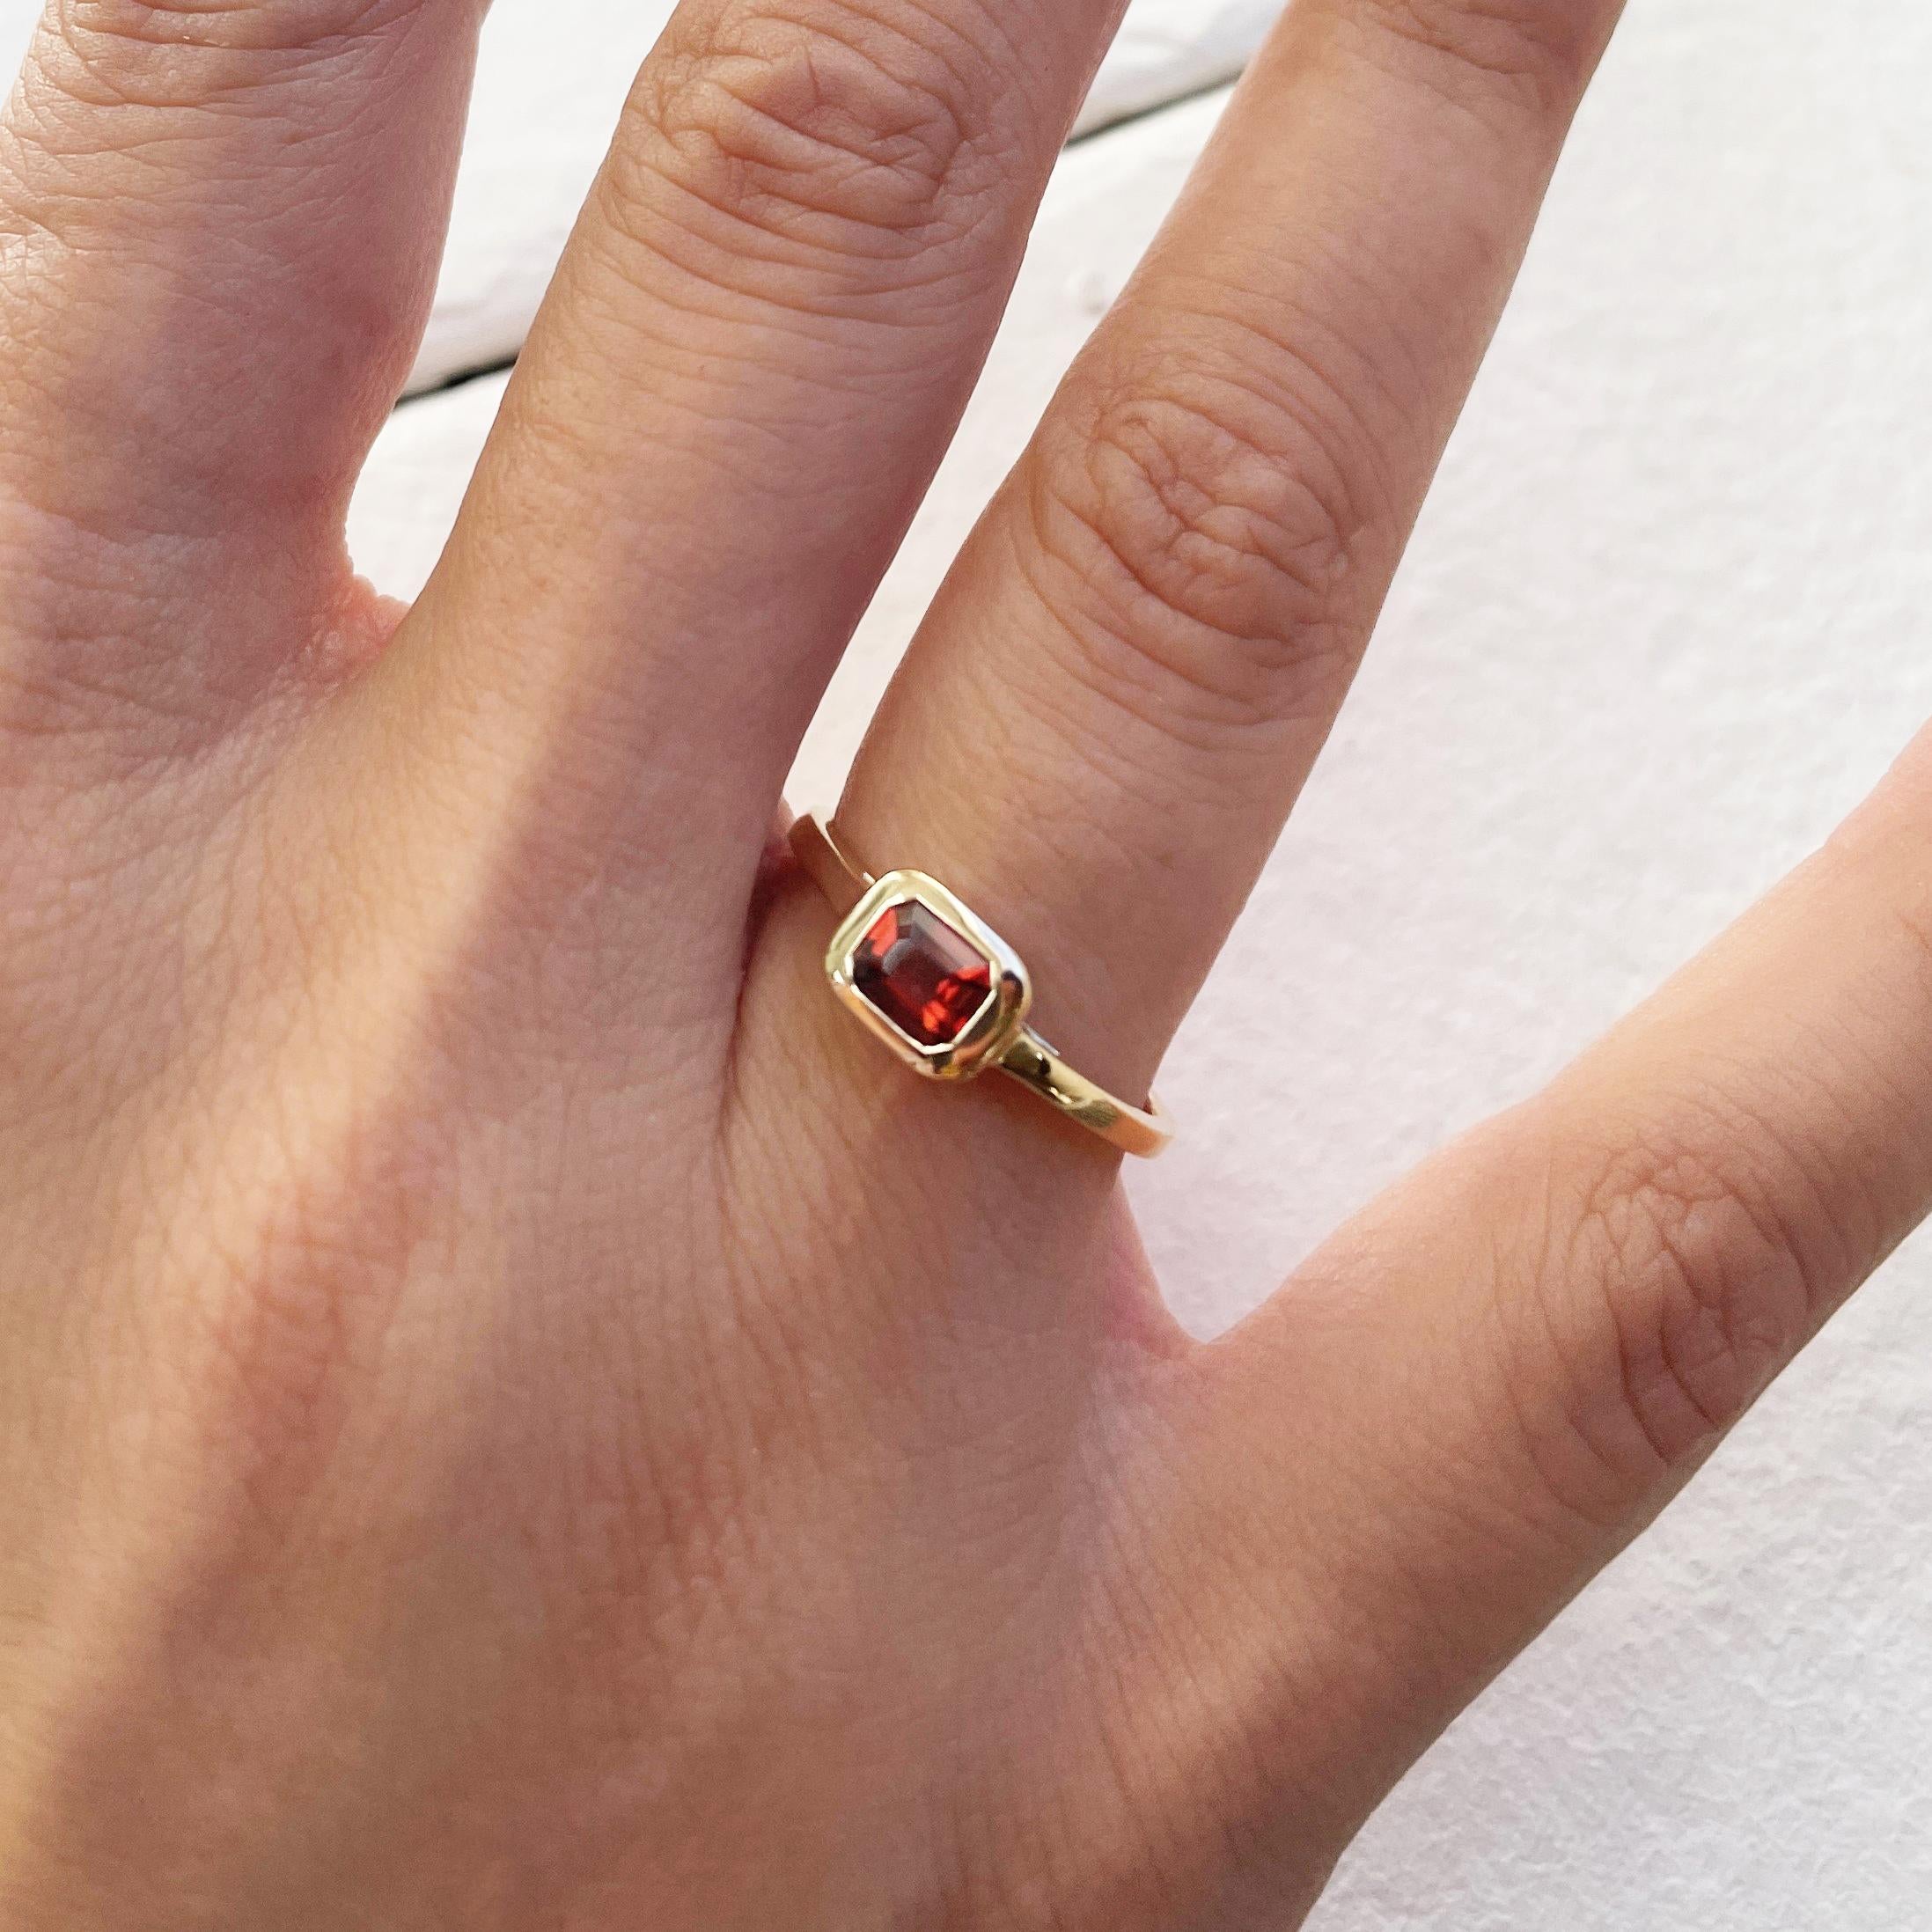 Charming Design - This stackable ring features a 14k gold band, and a emerald cut shaped gorgeous Garnet approximately 0.50cts, available in  white, yellow and rose gold
 Measurements for ring size: The finger Size of this sapphire ring is 6.5 and